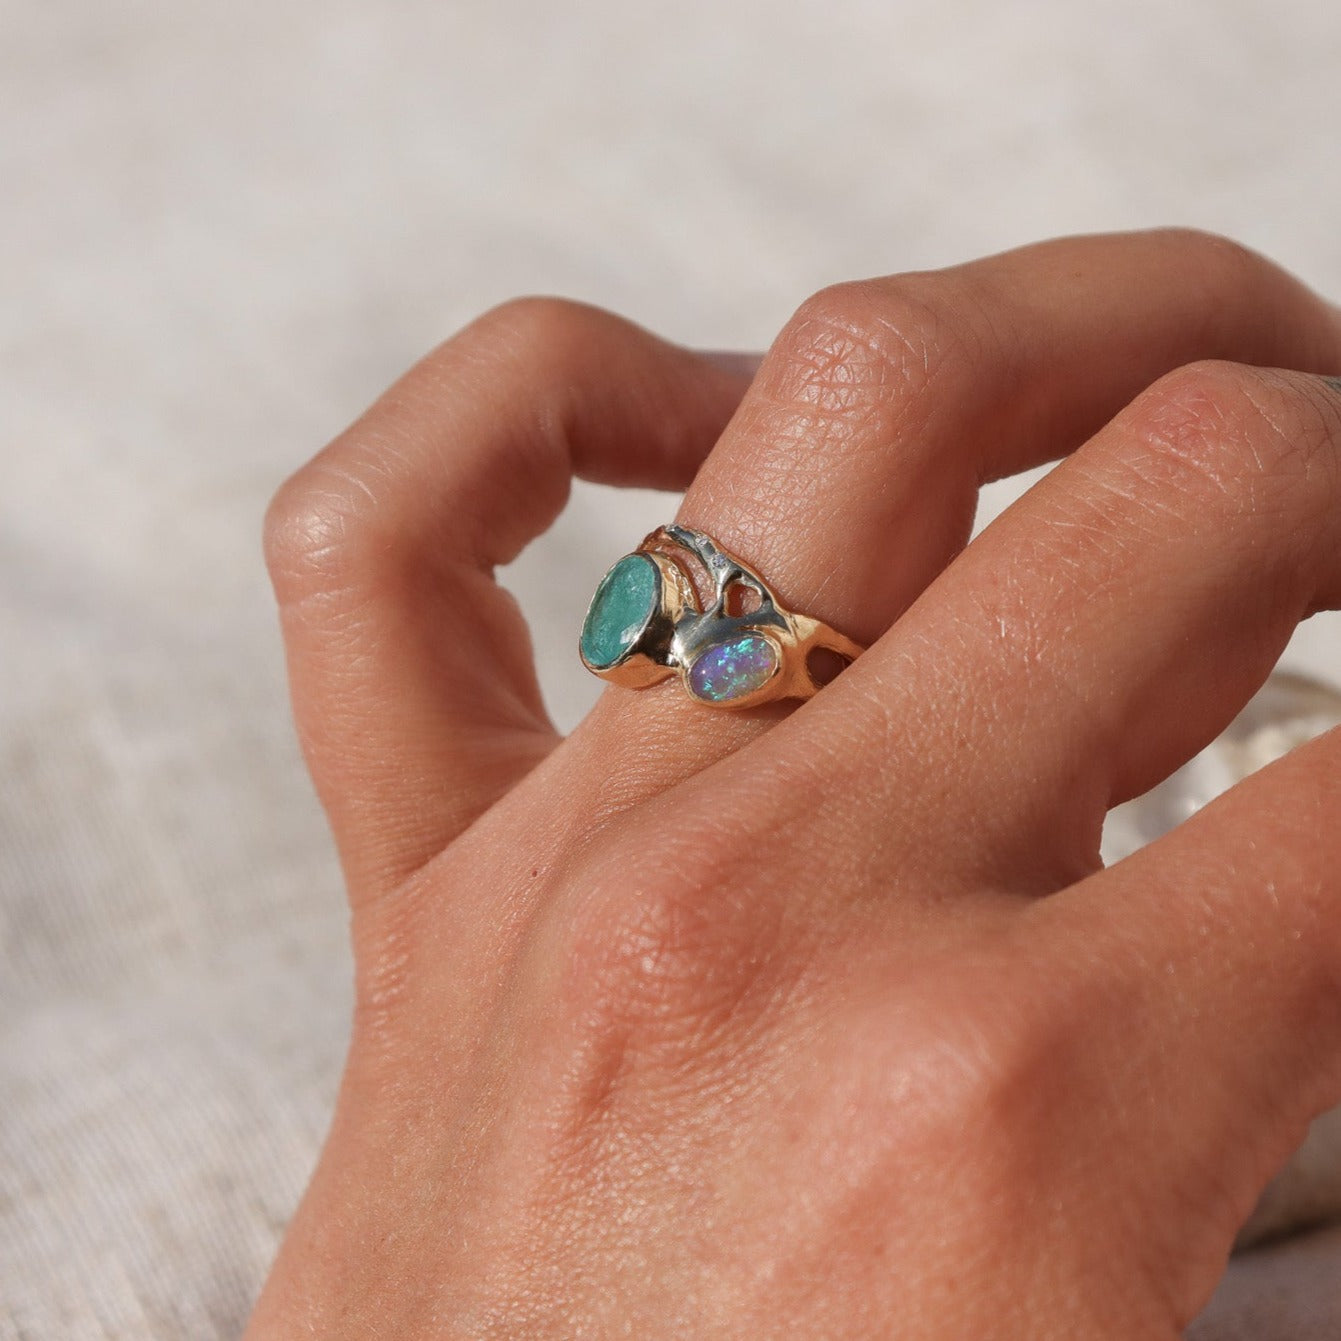 Organically shaped ring with a stunning Paraiba tourmaline and opal, bezel-set and accented with dazzling diamonds worn on a finger and showing the side.